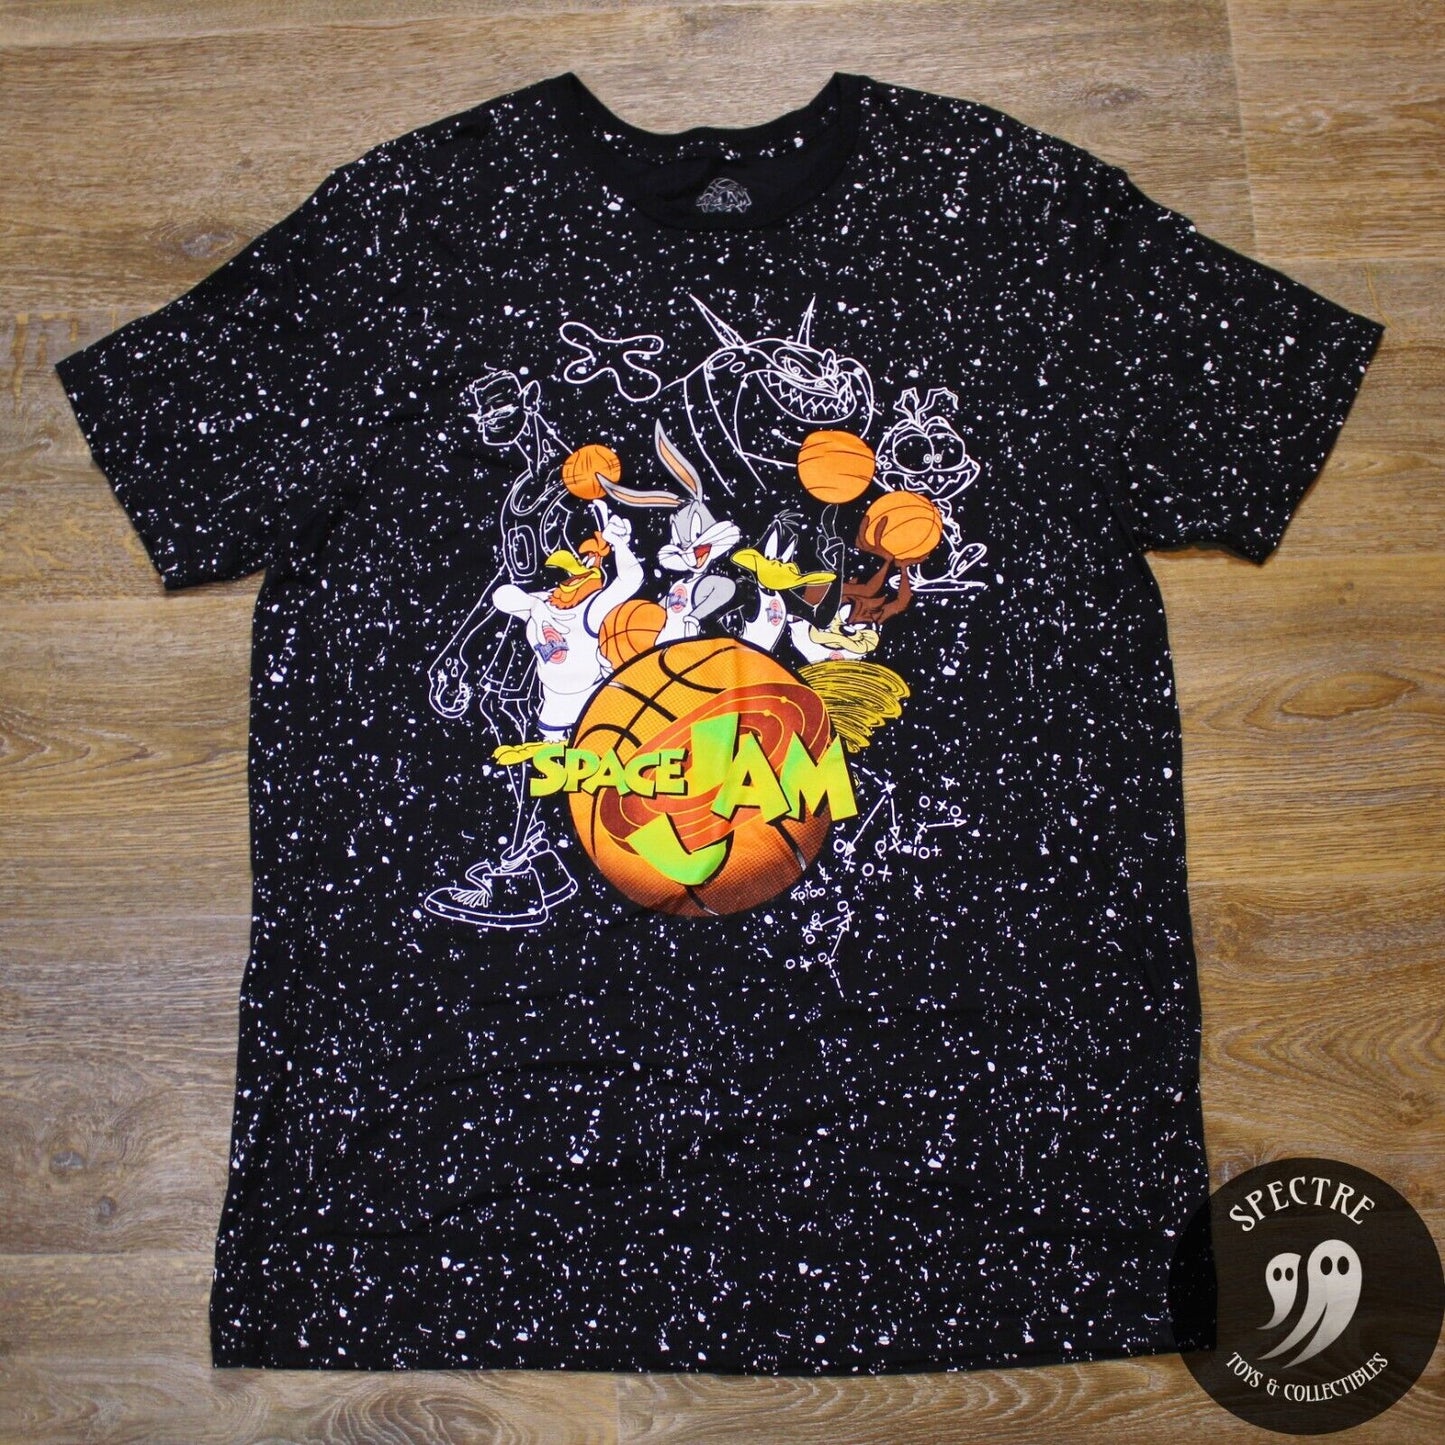 Space Jam Tune Squad All Over Print Looney Tunes Black T-Shirt- Men's Size XL